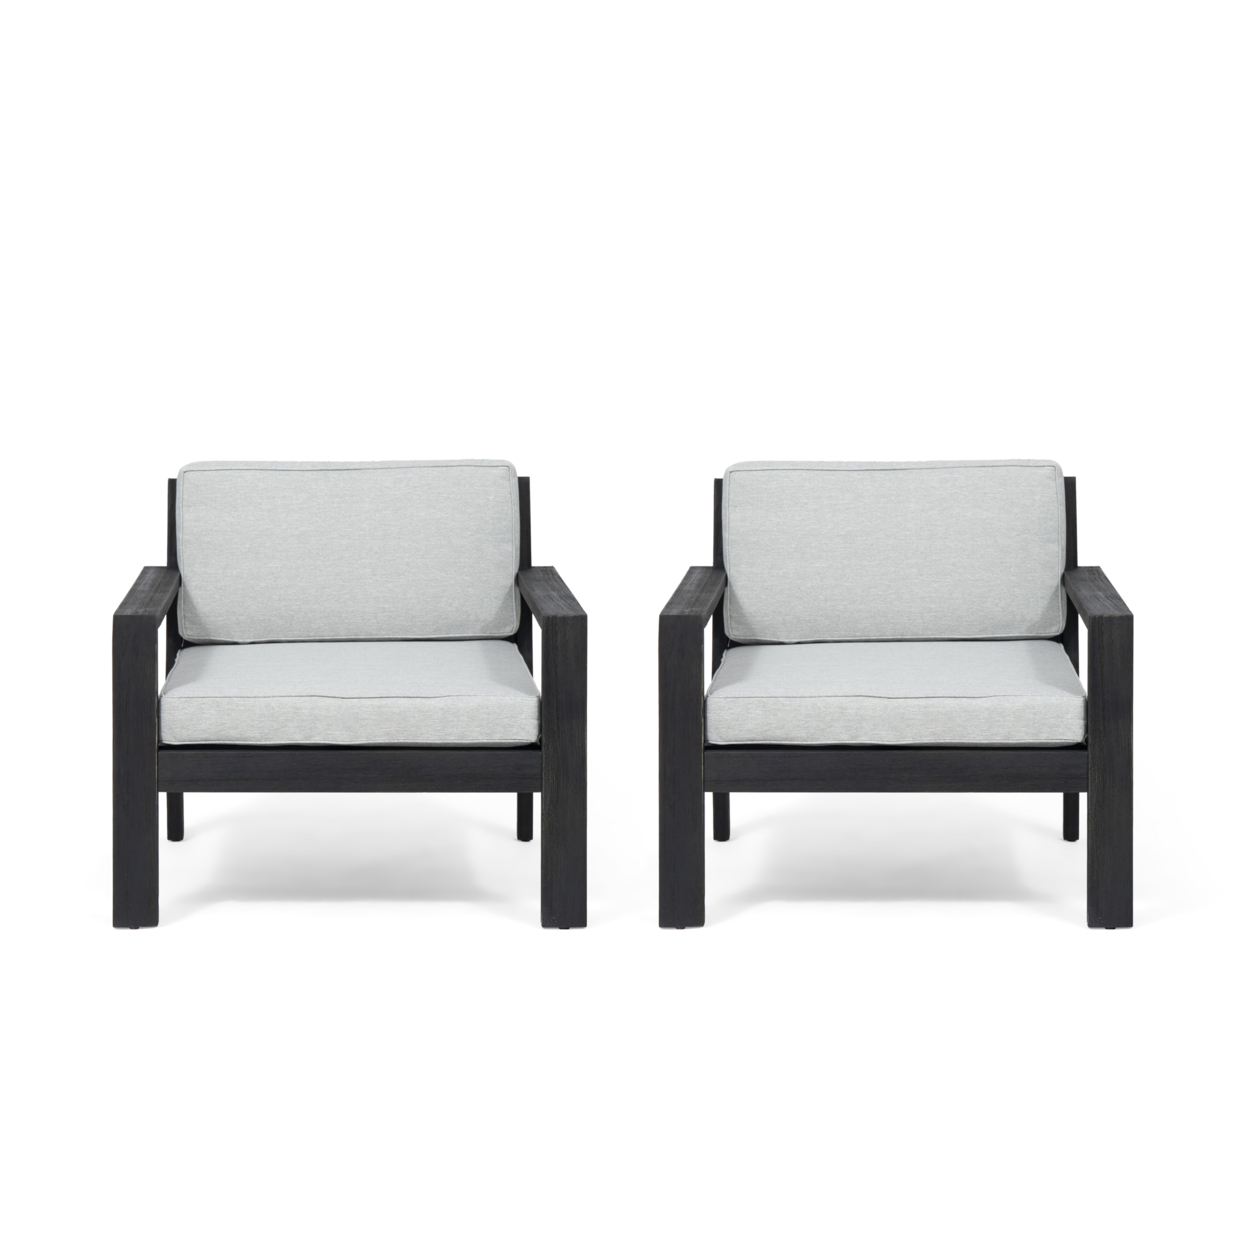 Susan Outdoor Acacia Wood Club Chairs With Cushions (Set Of 2) - Brushed Dark Gray Finish, Light Gray